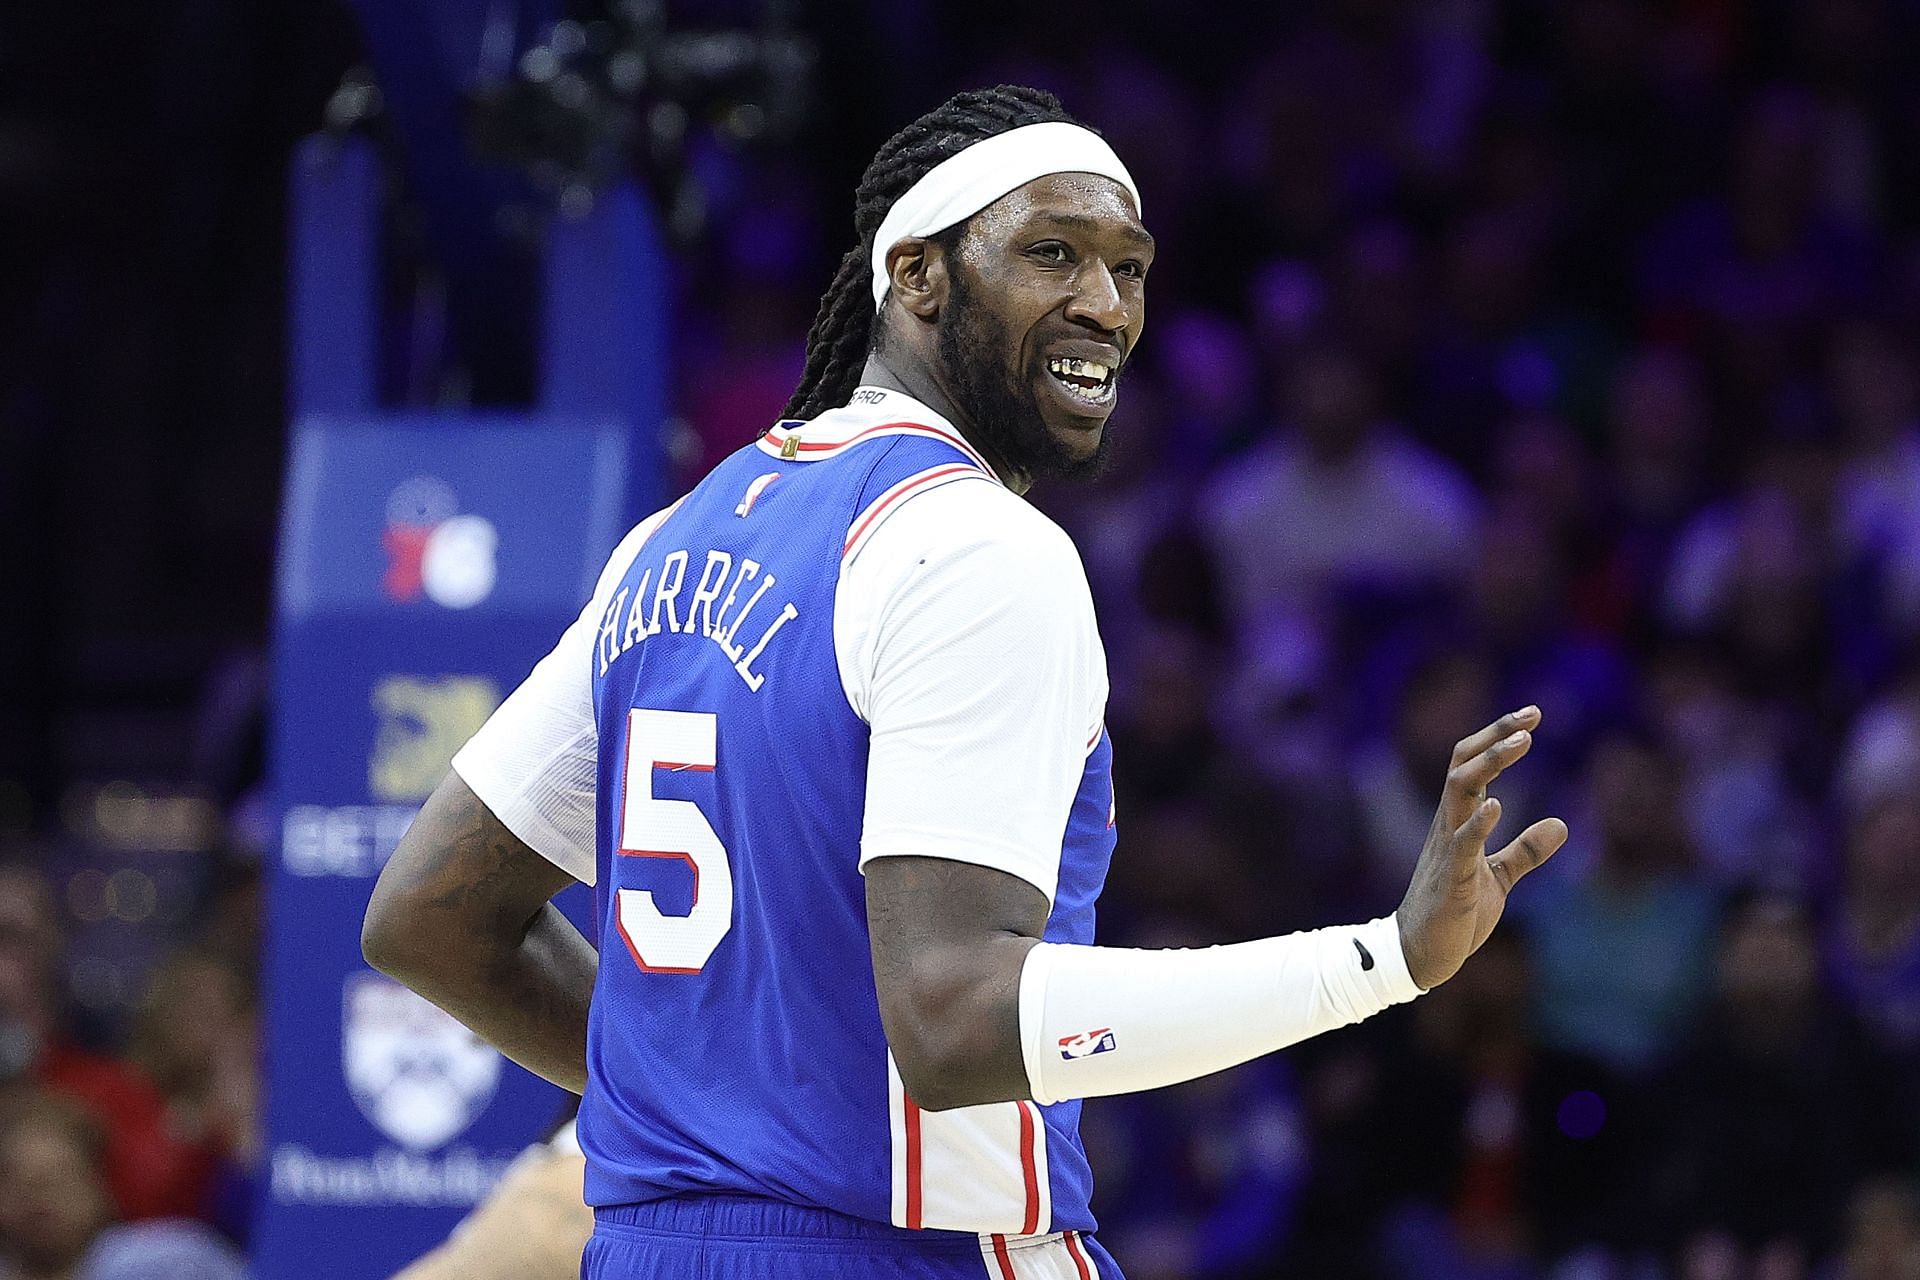 James Harden taking less money allowed Sixers to sign Montrezl Harrell?